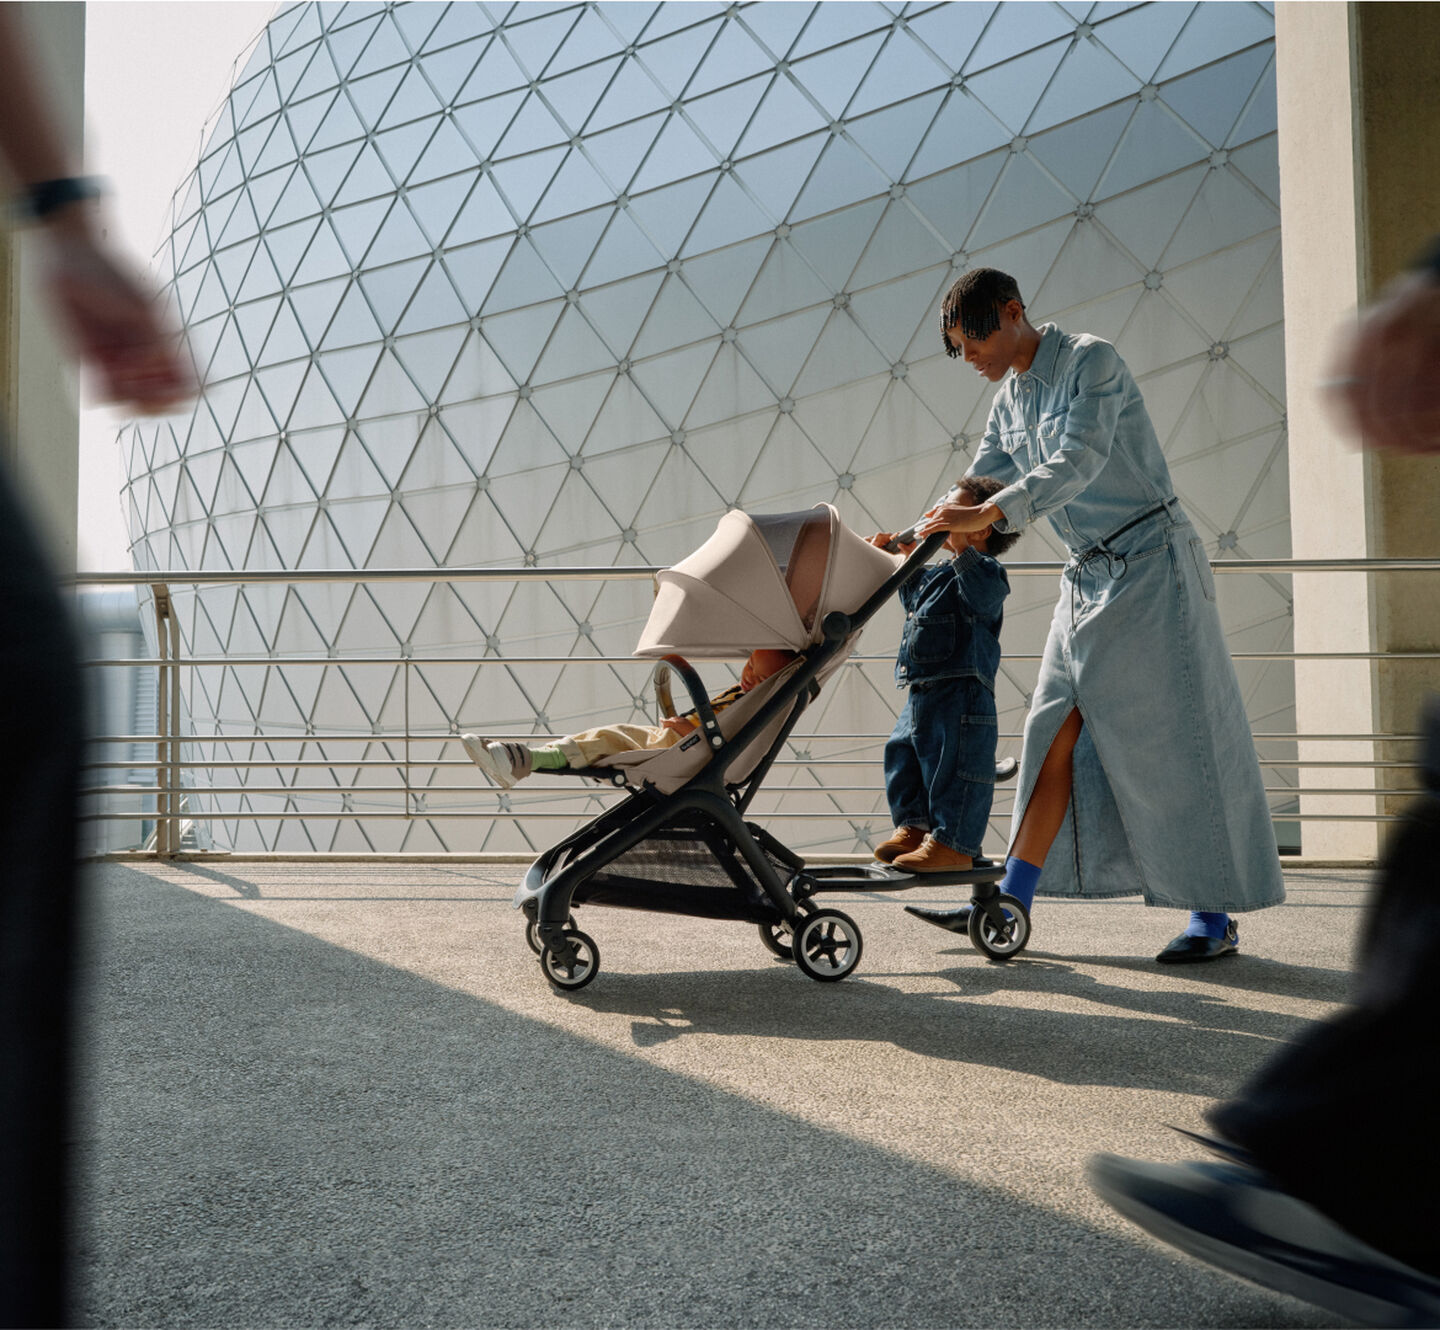 A stylish mom walks with her baby in a Bugaboo Butterfly travel pram, while her toddler rides along on the wheeled board.